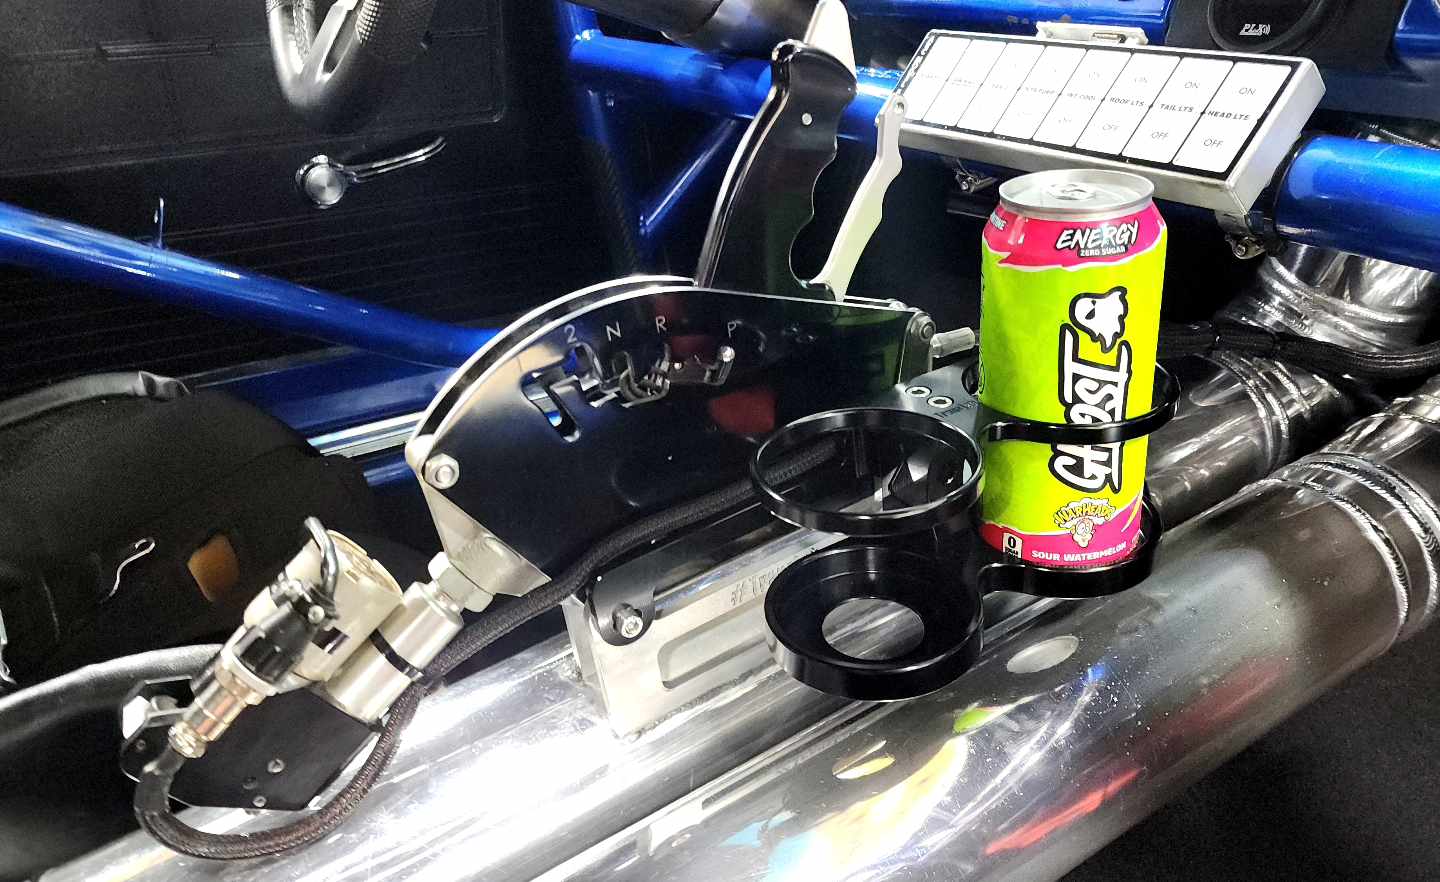 Translab billet cupholder For Precision, M&M and other shifters